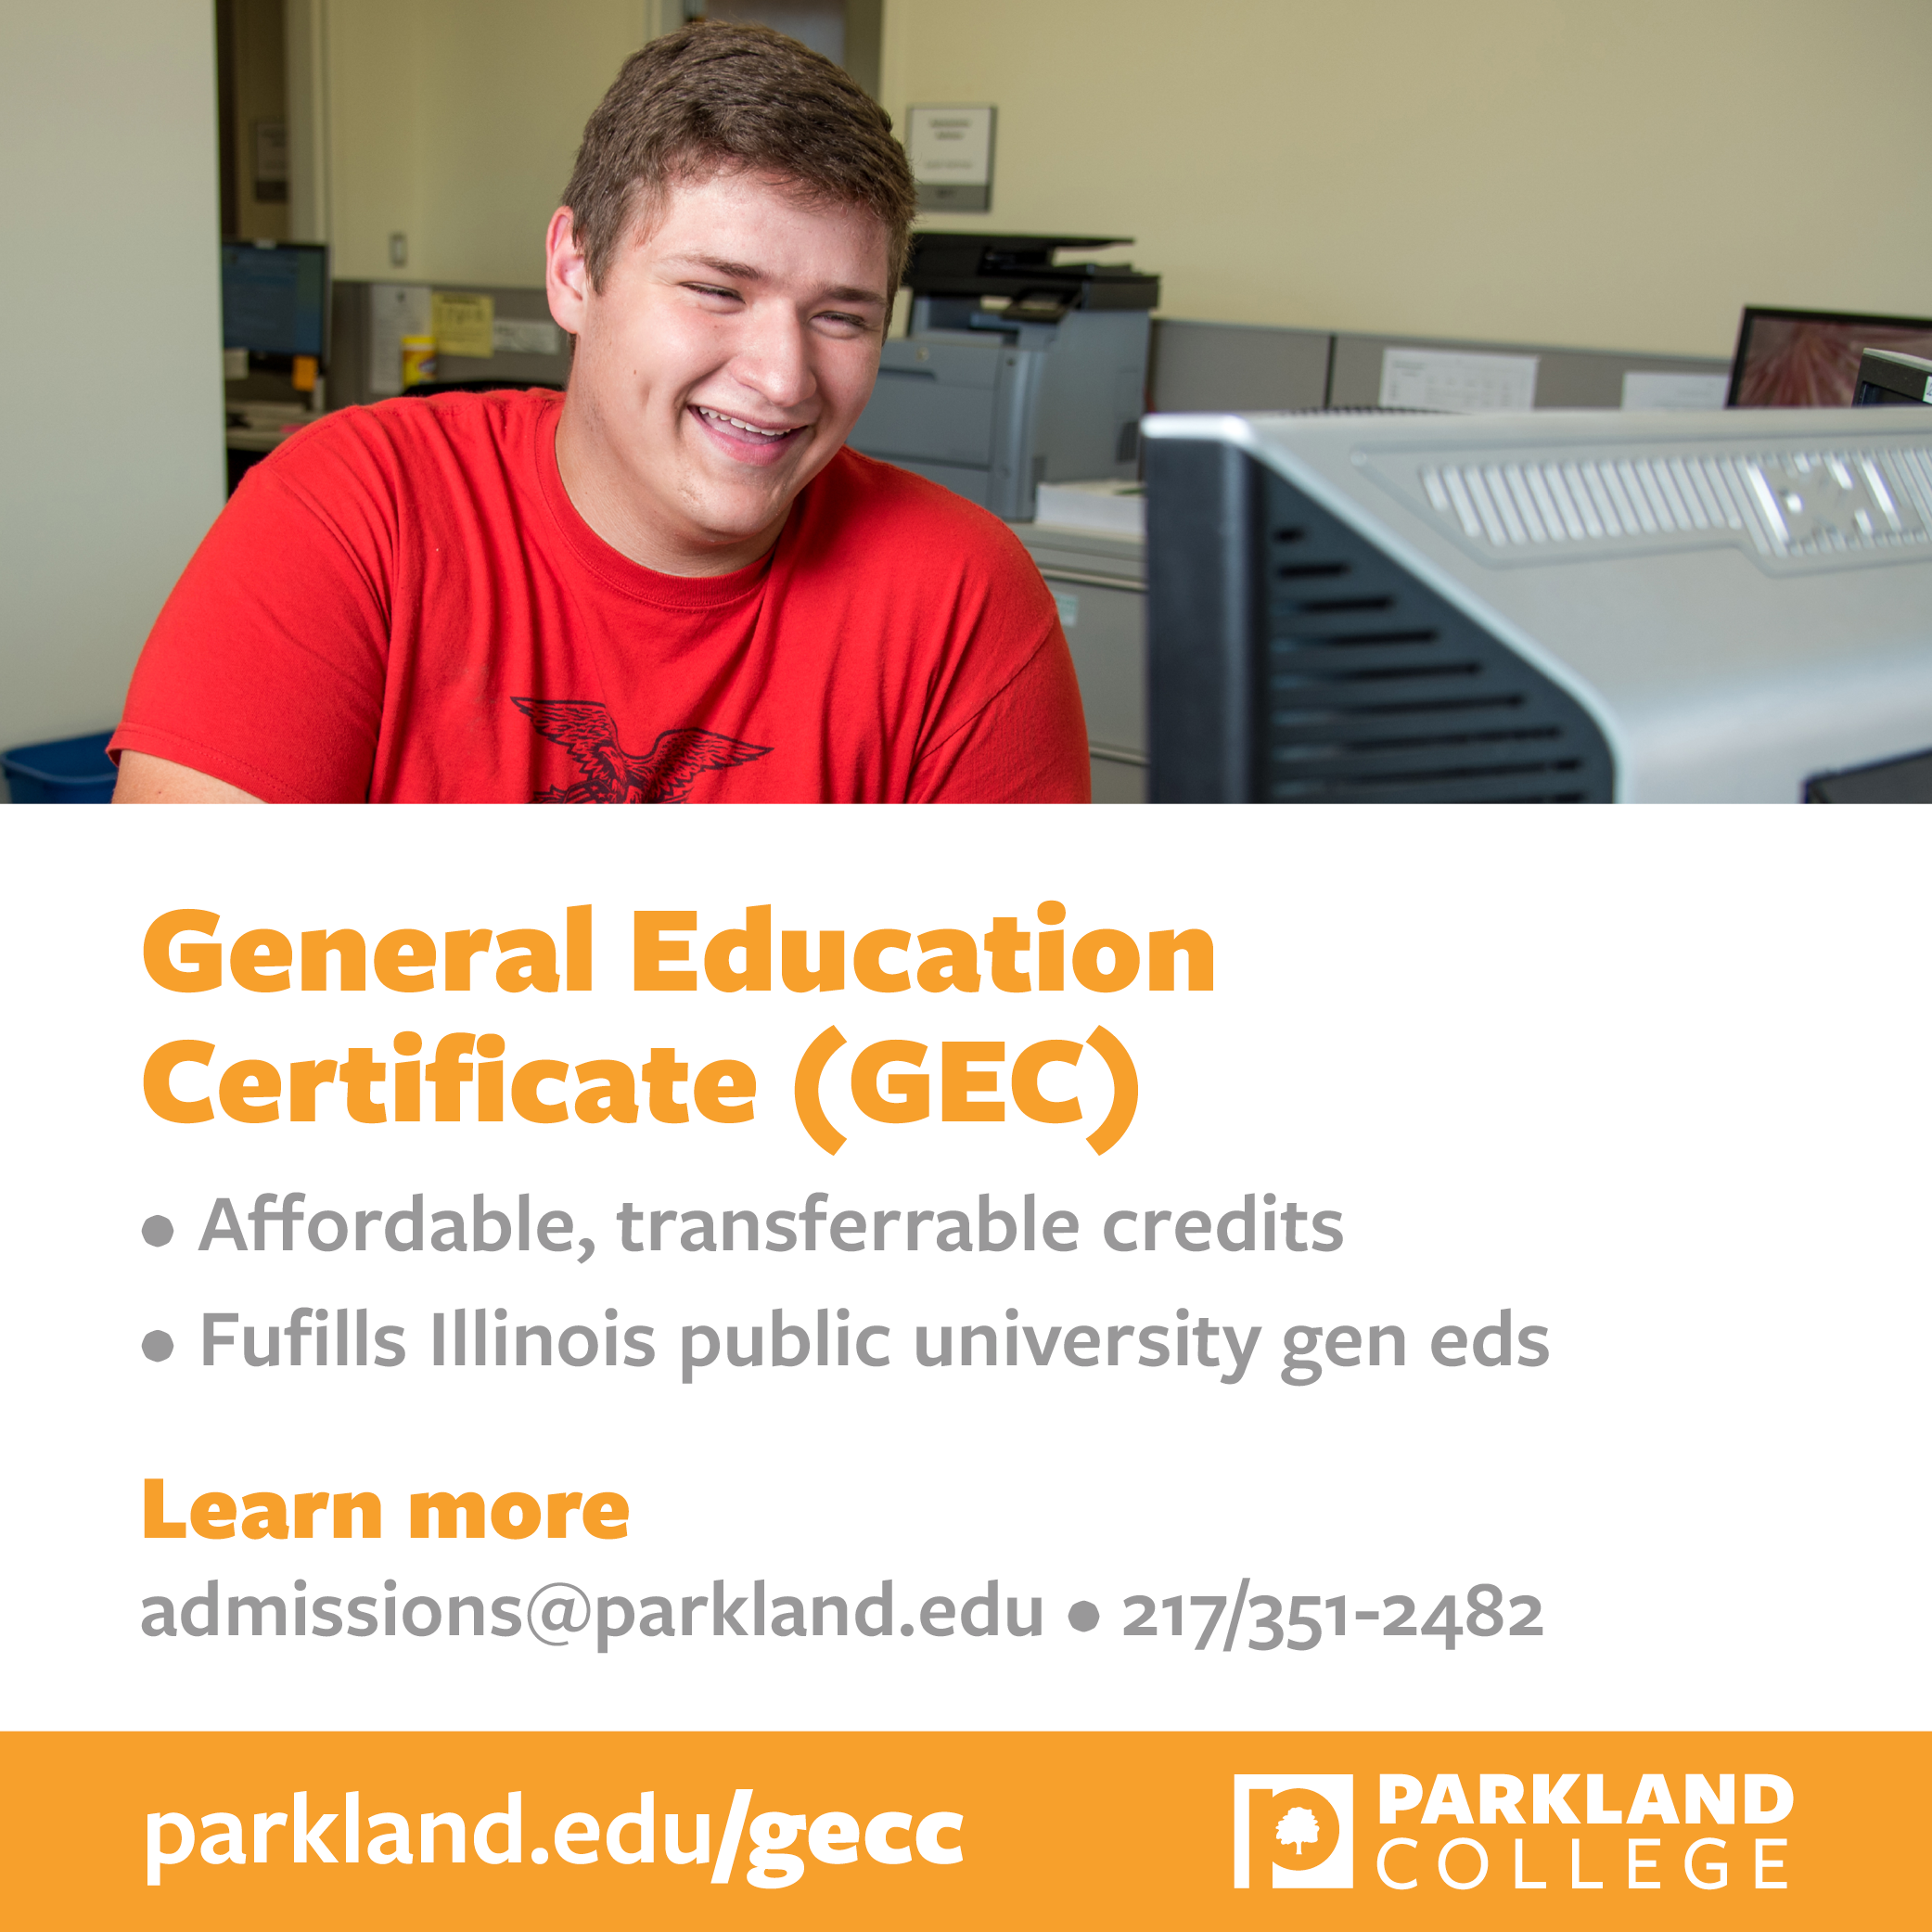 General Education Certificate gives you affordable, transferrable credits that fulfill Illinois public university gen eds